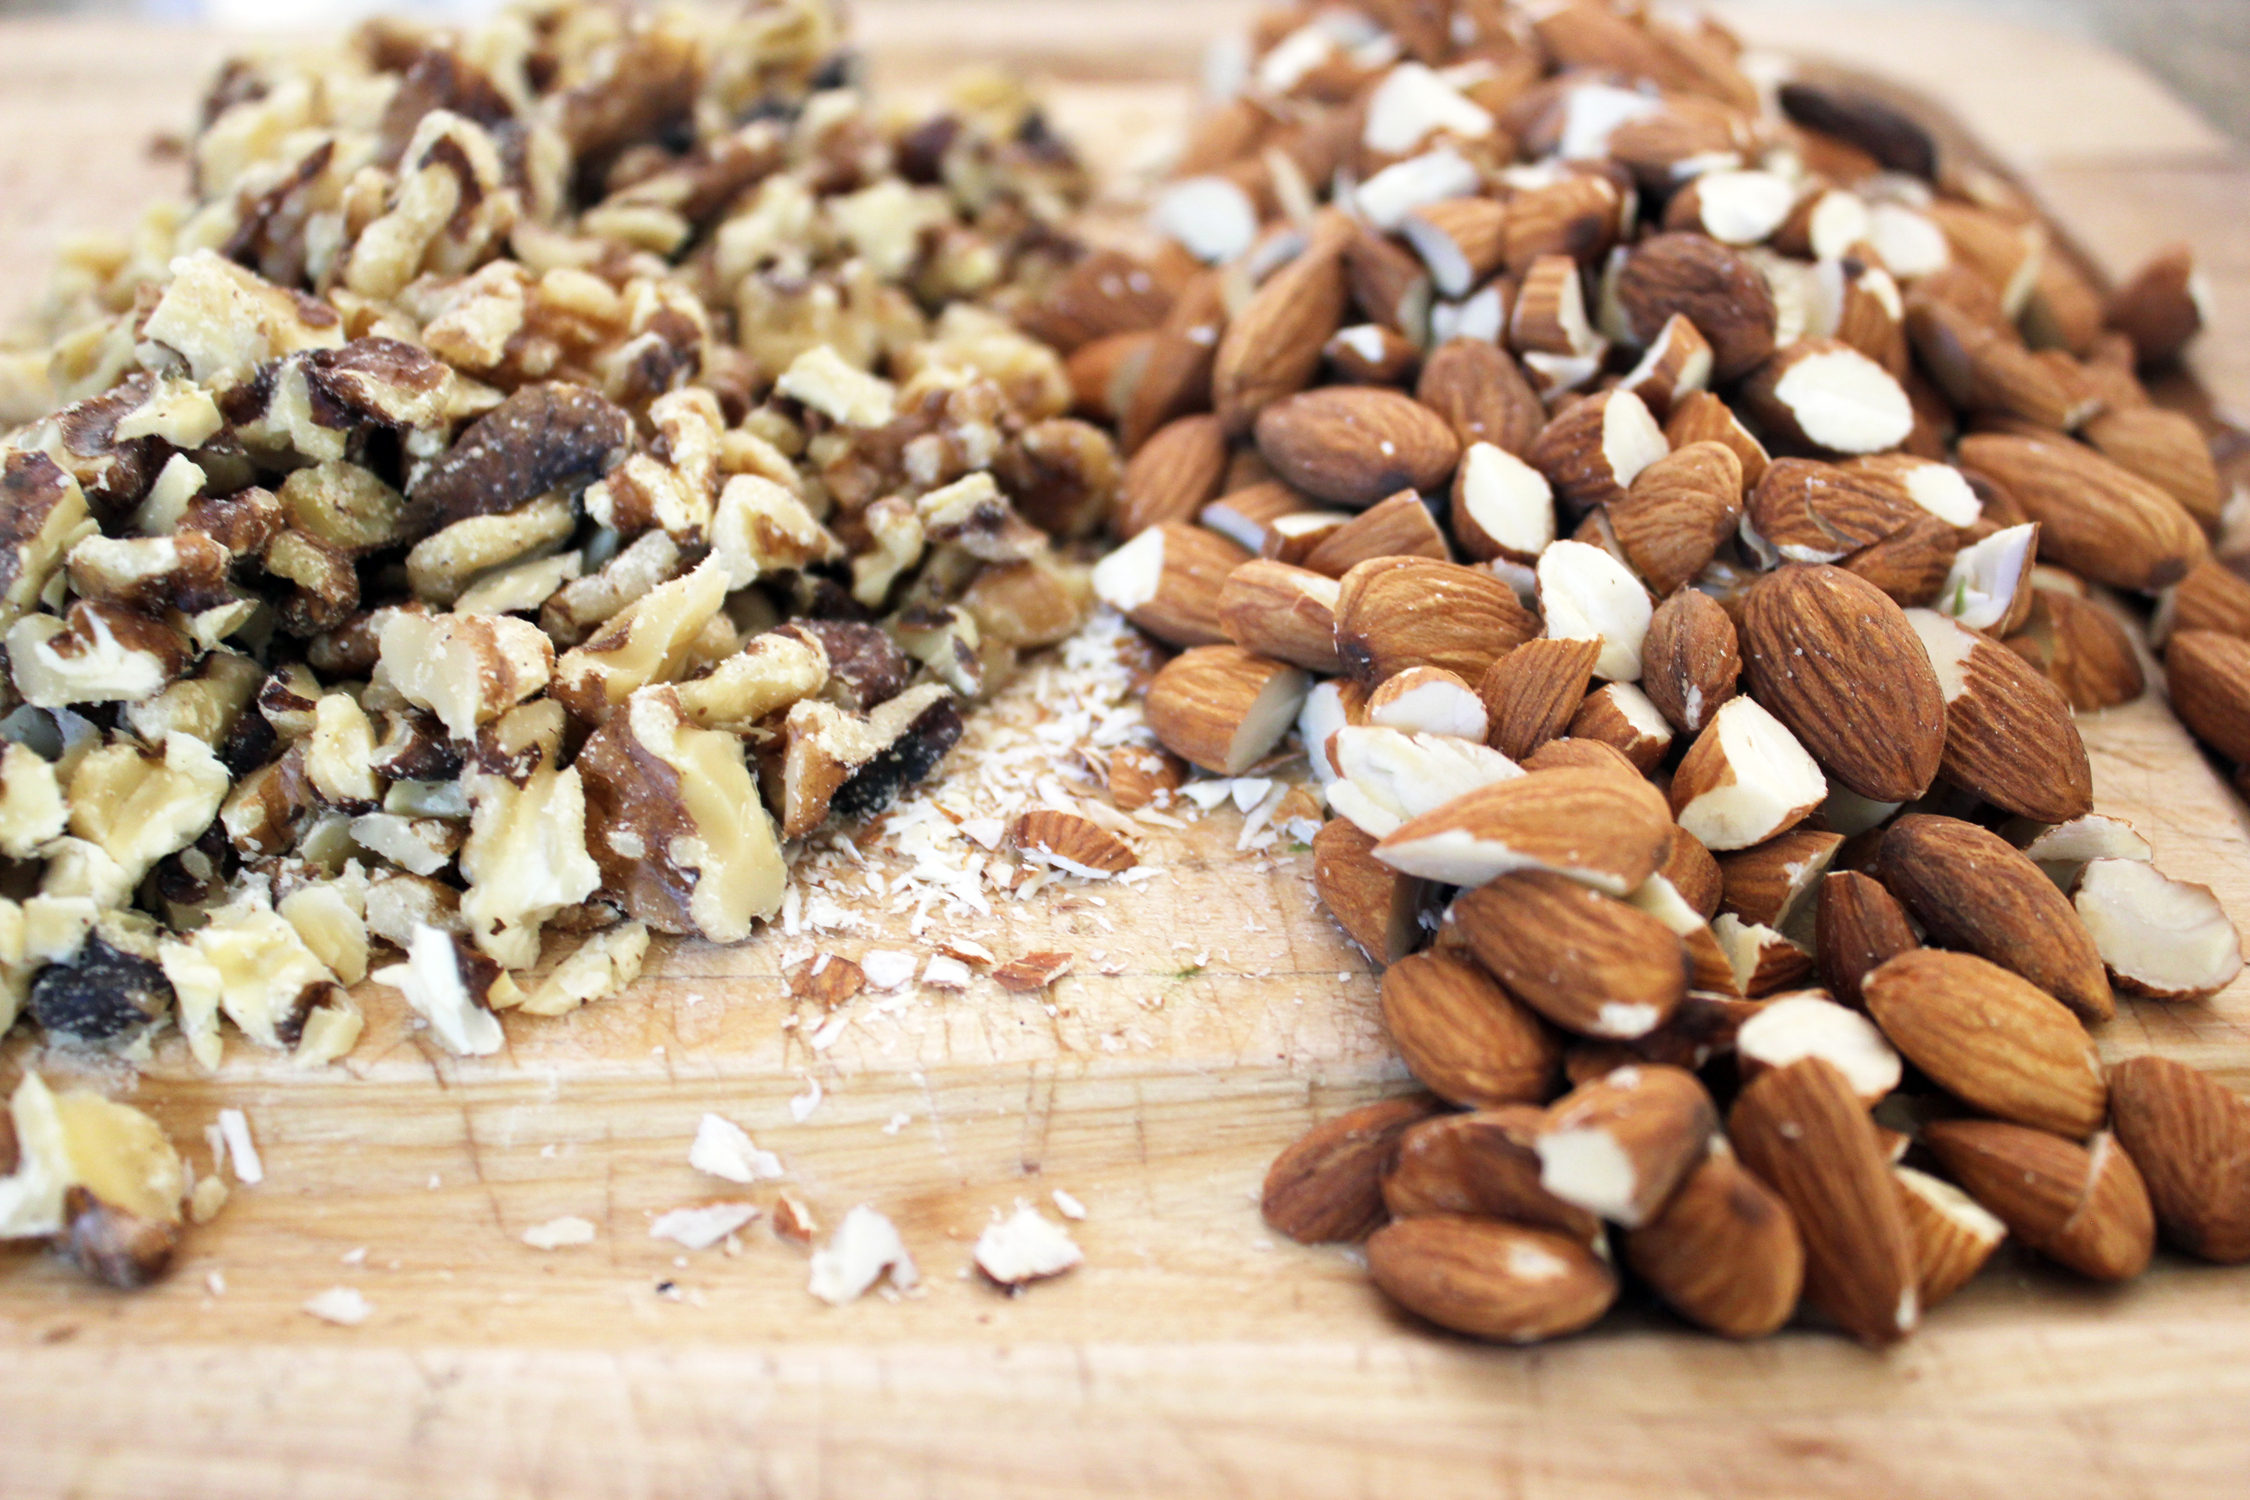 Our current recipe has a mix of chopped walnuts and almonds, but I'll often add pumpkin seeds, sunflower seeds and spoonful of millet for an extra crunch.